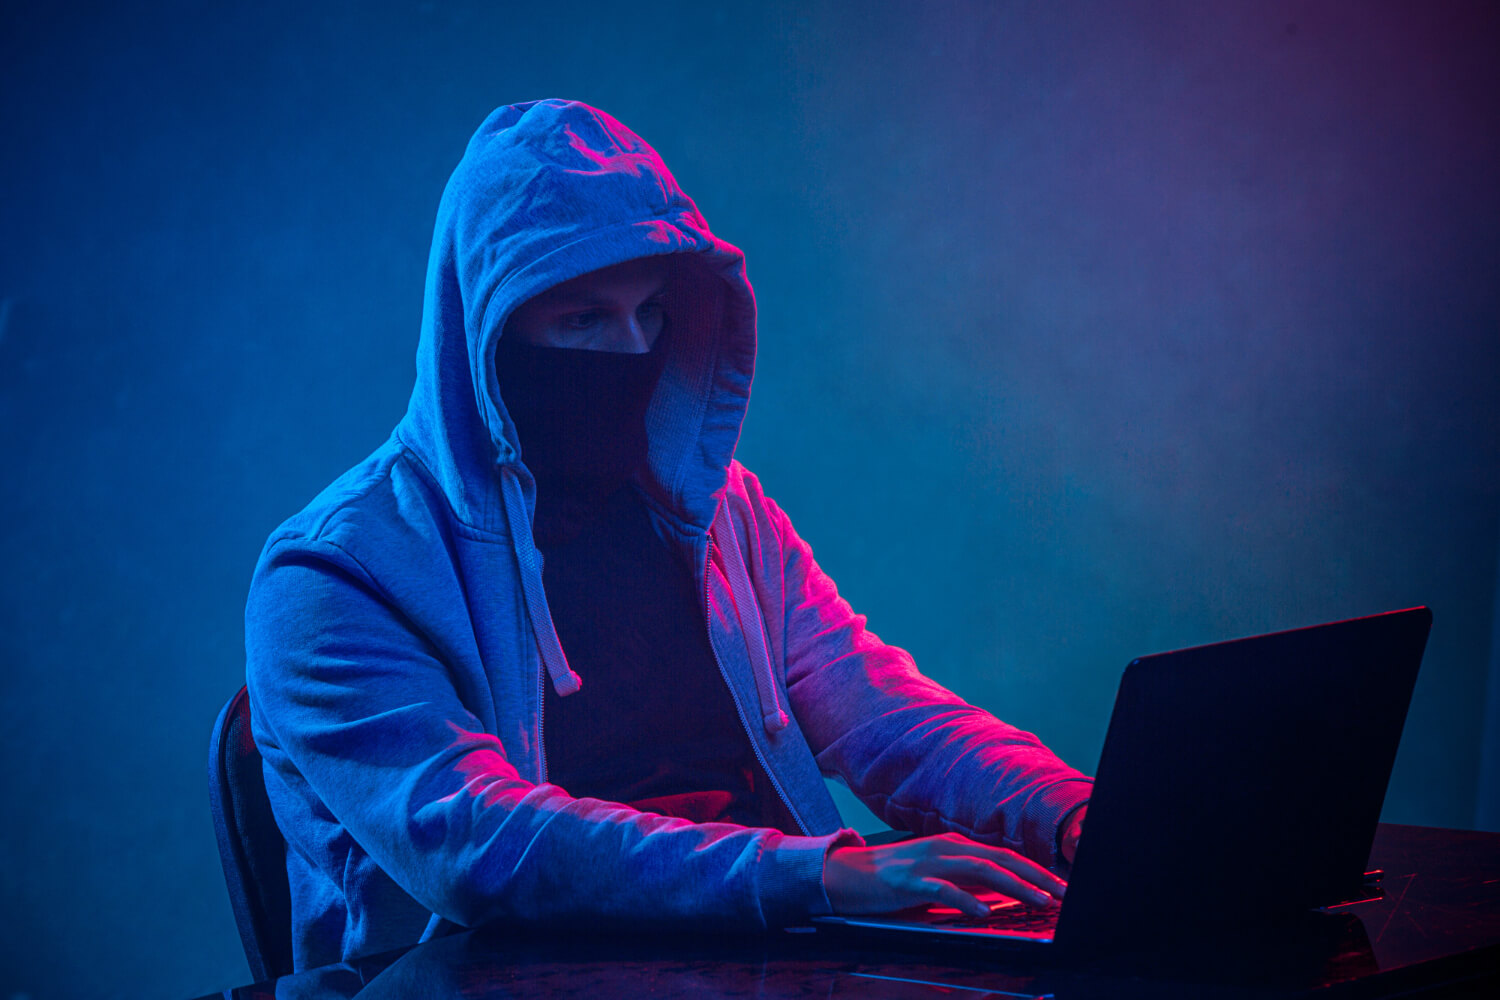 hooded-computer-hacker-stealing-information-with-laptop